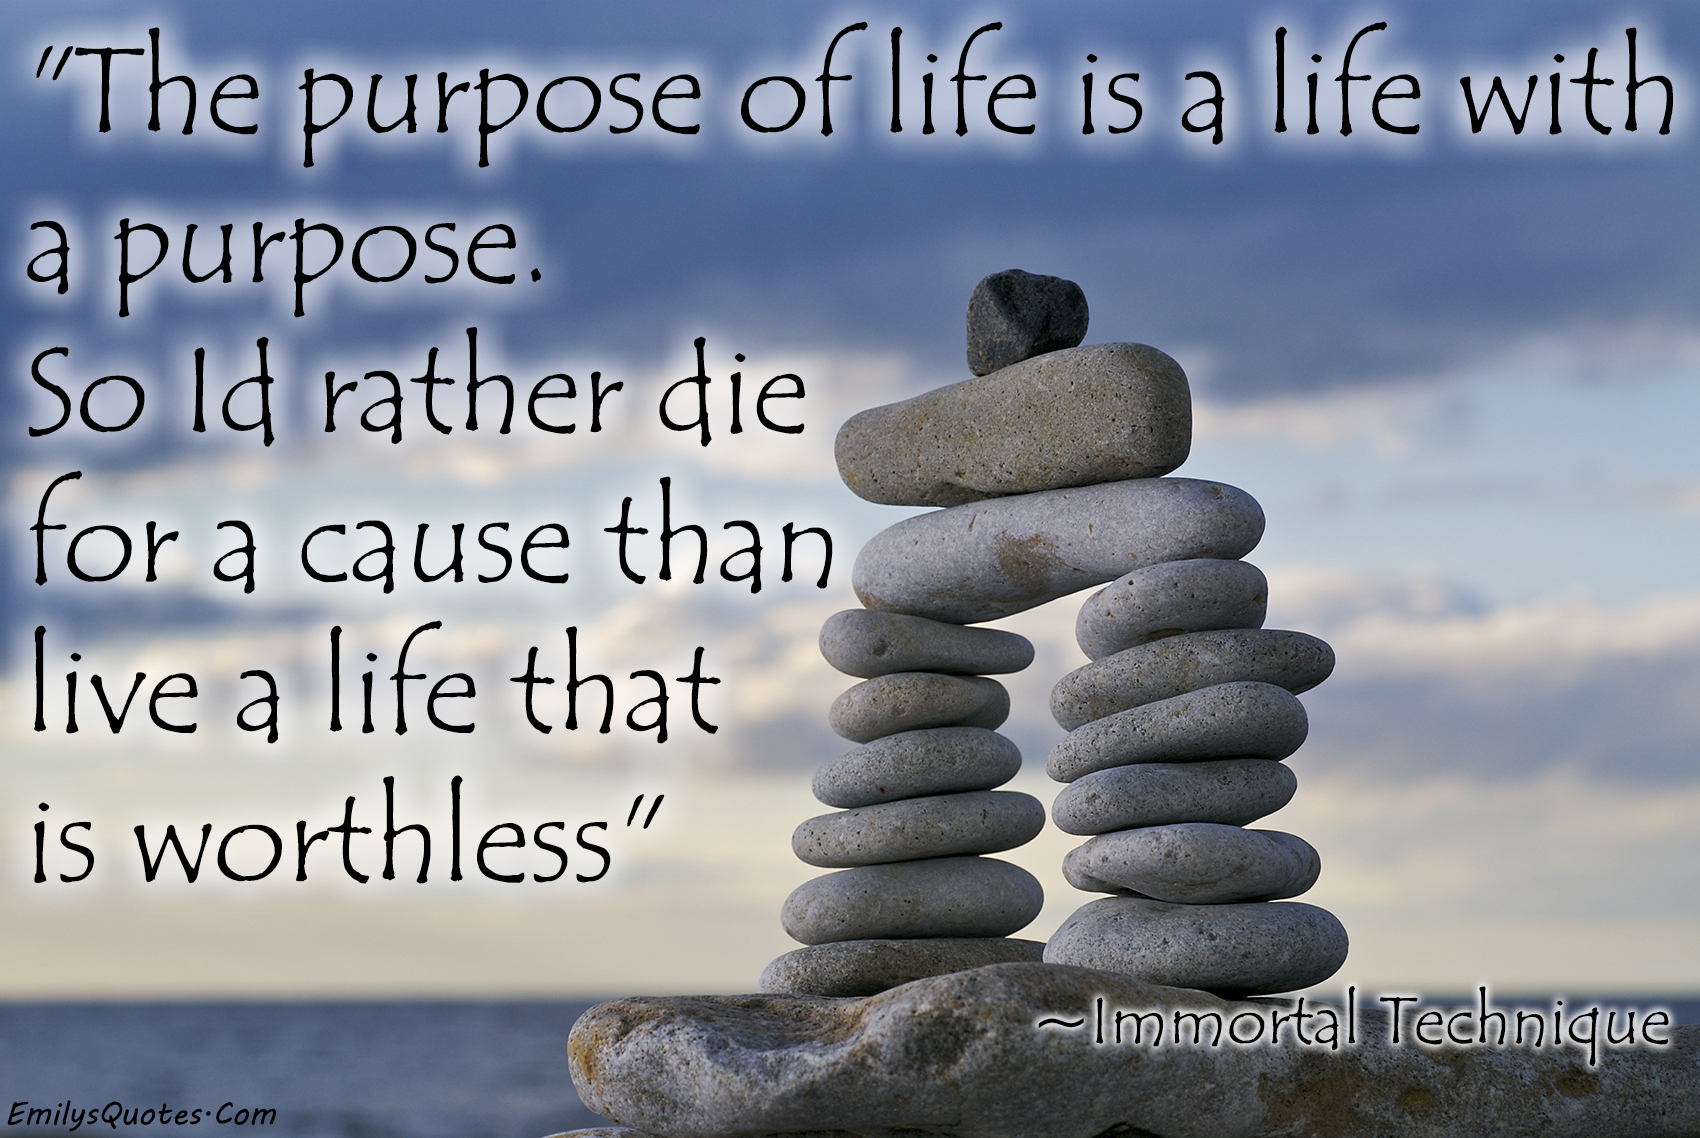 The purpose of life is a life with a purpose. So I’d rather die for a ...